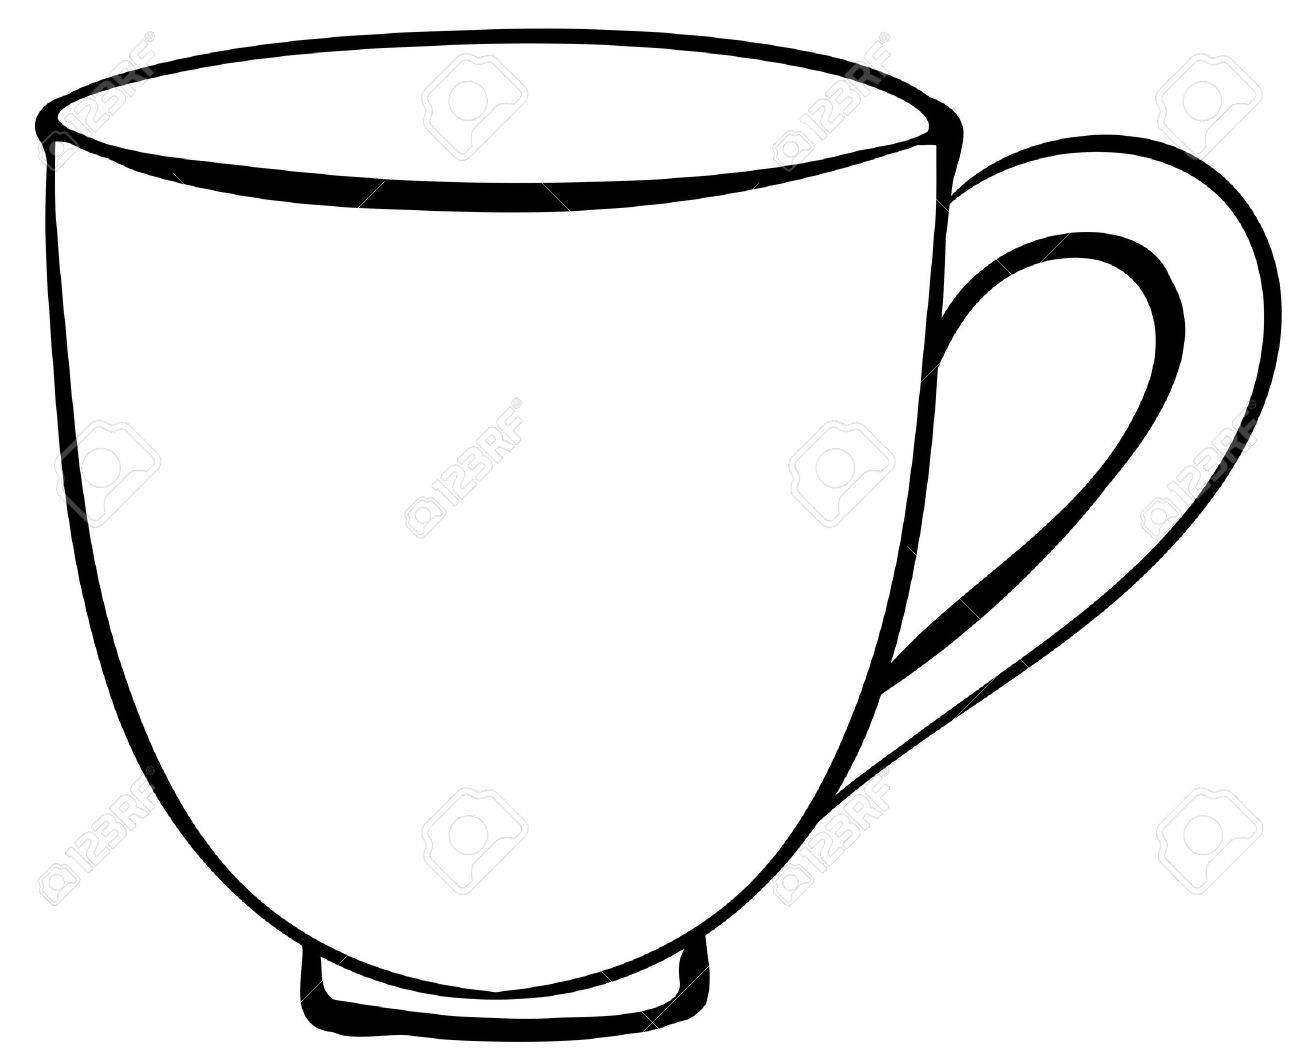 Cup clipart outline.